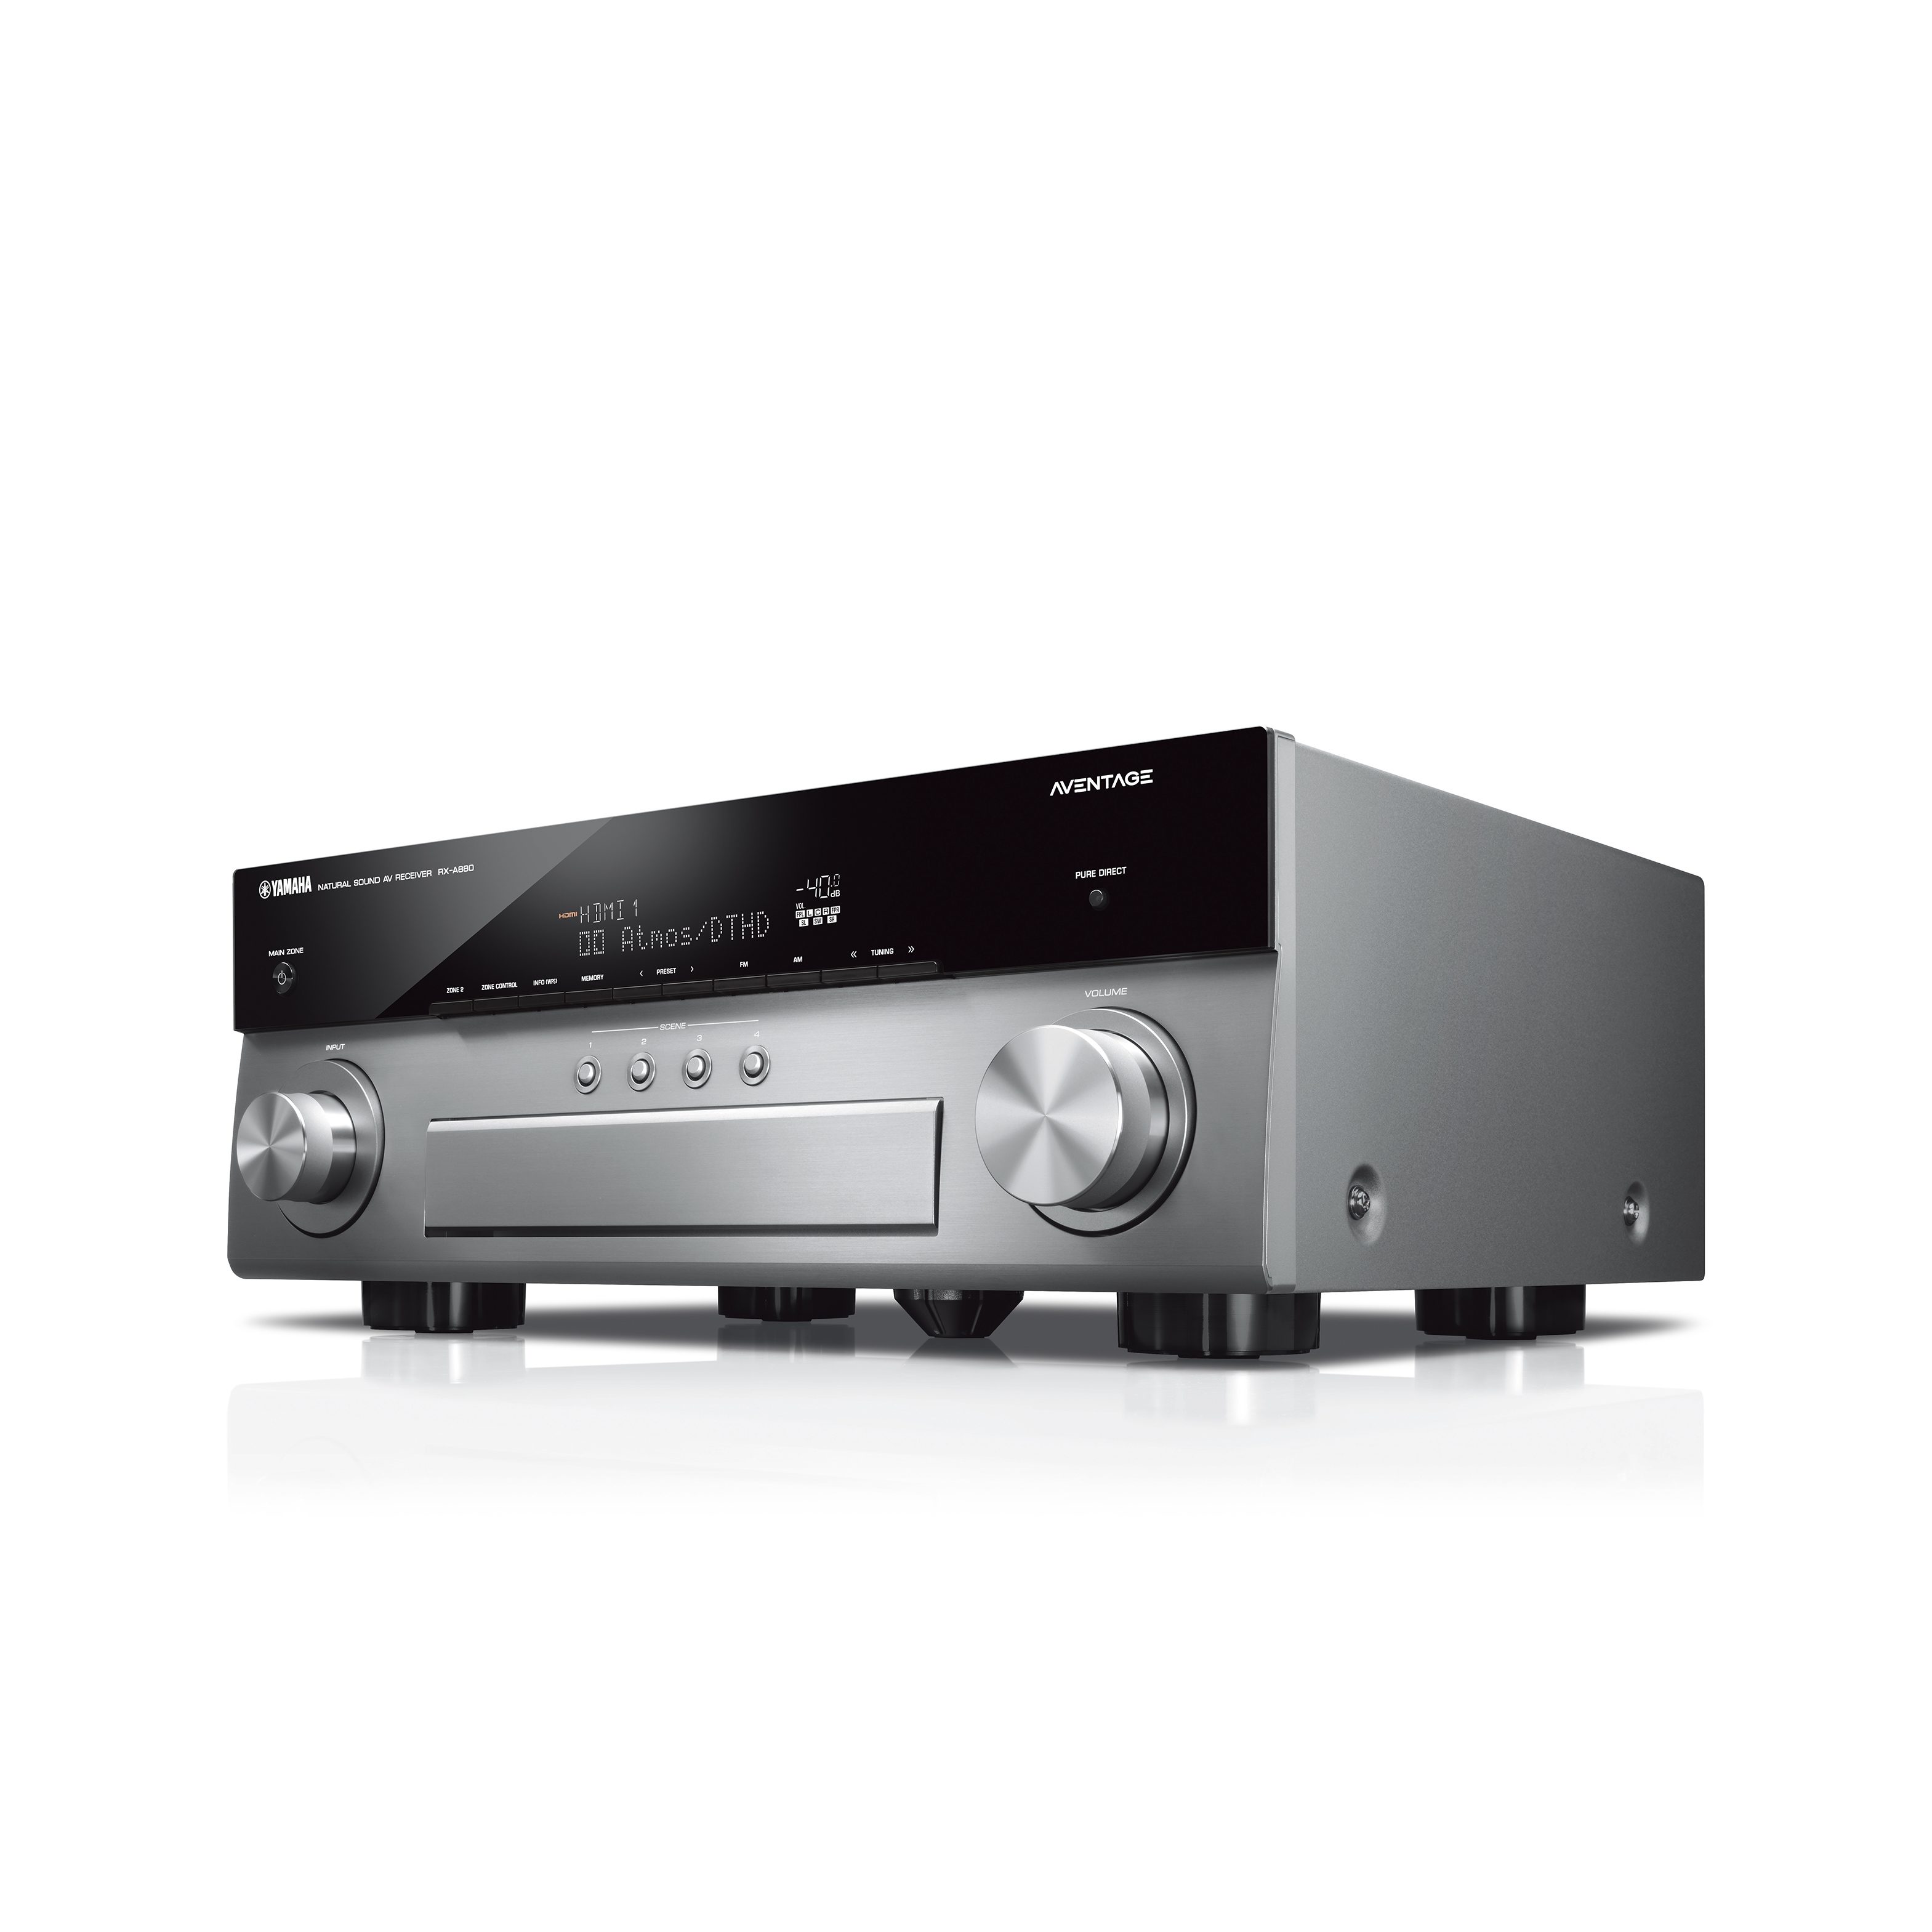 RX-A880 - Overview - AV Receivers - Audio & Visual - Products 